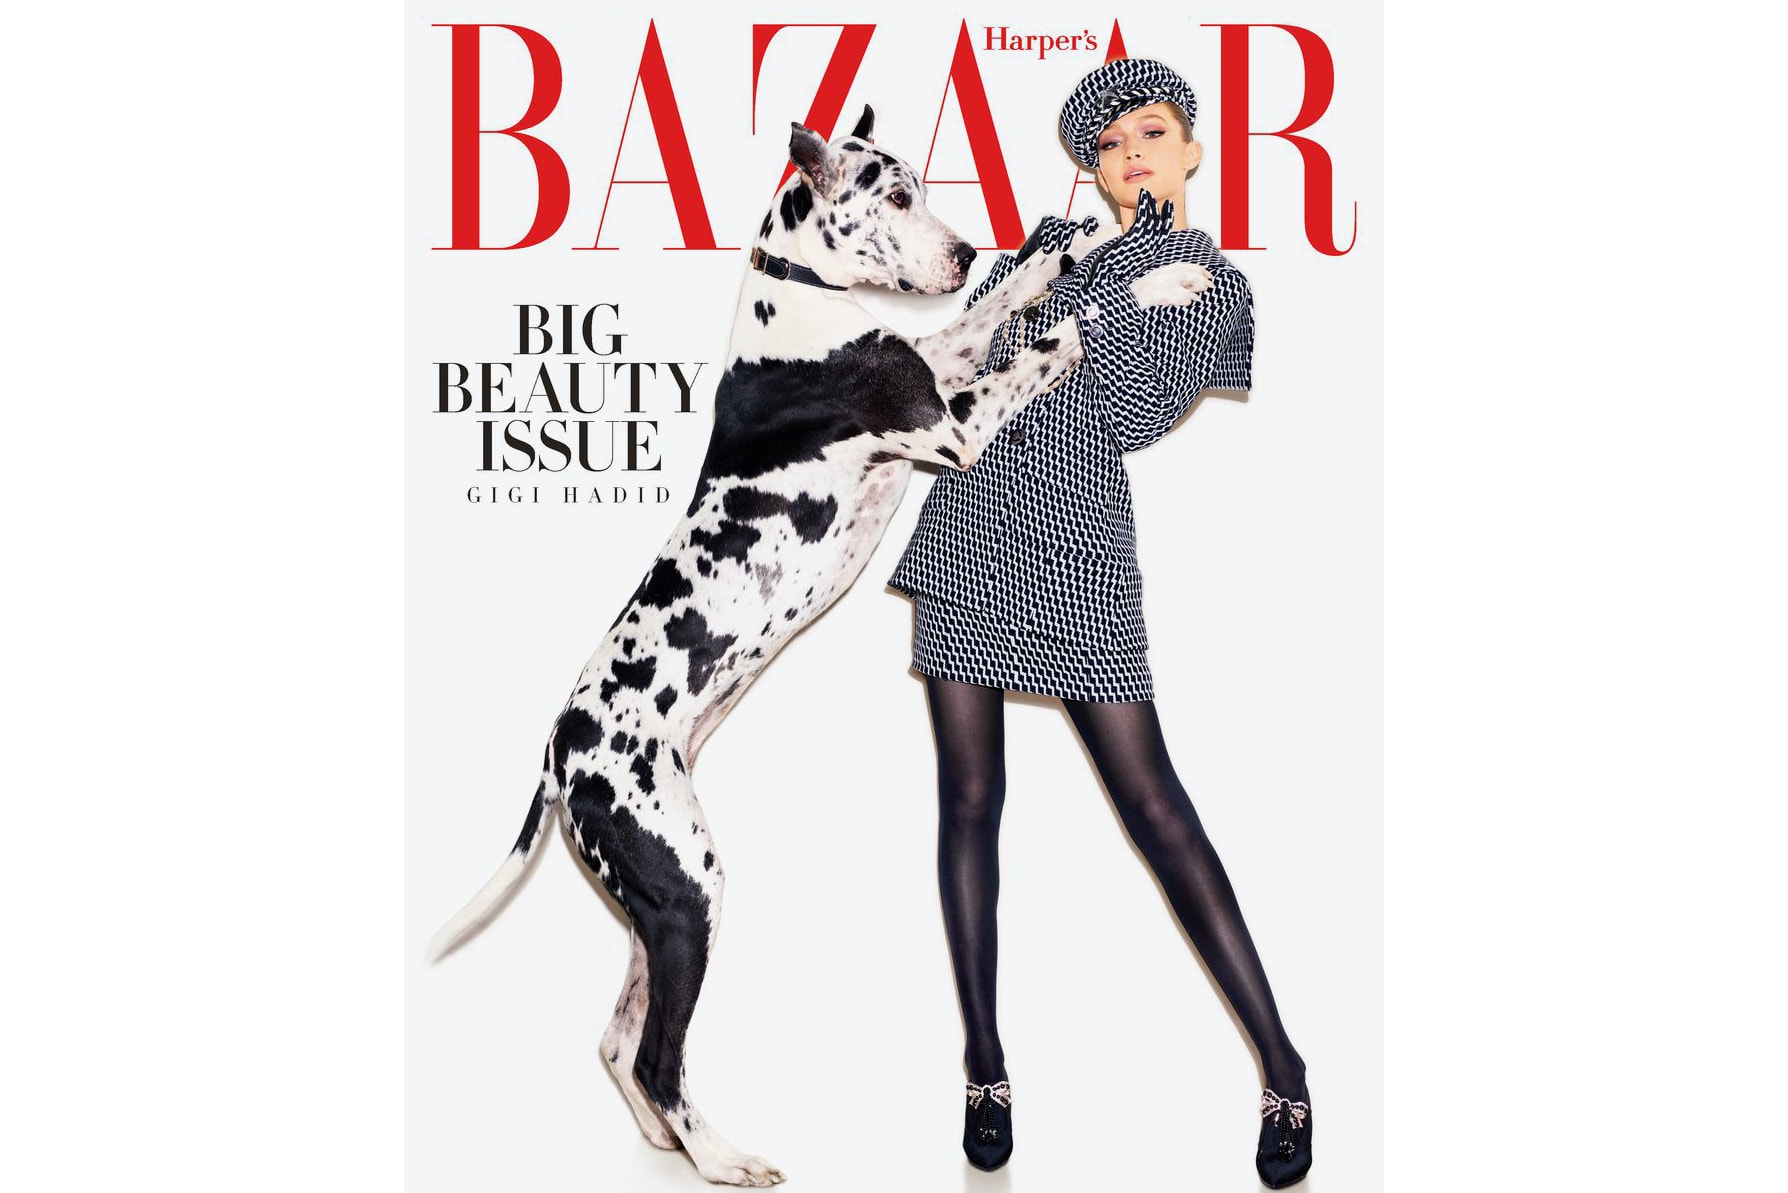 Gigi Hadid Harper's Bazaar May 2018 Issue Cover Editorial Magazine Dogs Puppies Dalmatian Interview Blake Lively Body Shamers Haters Instagram Social Media Trolls Woman Supporting